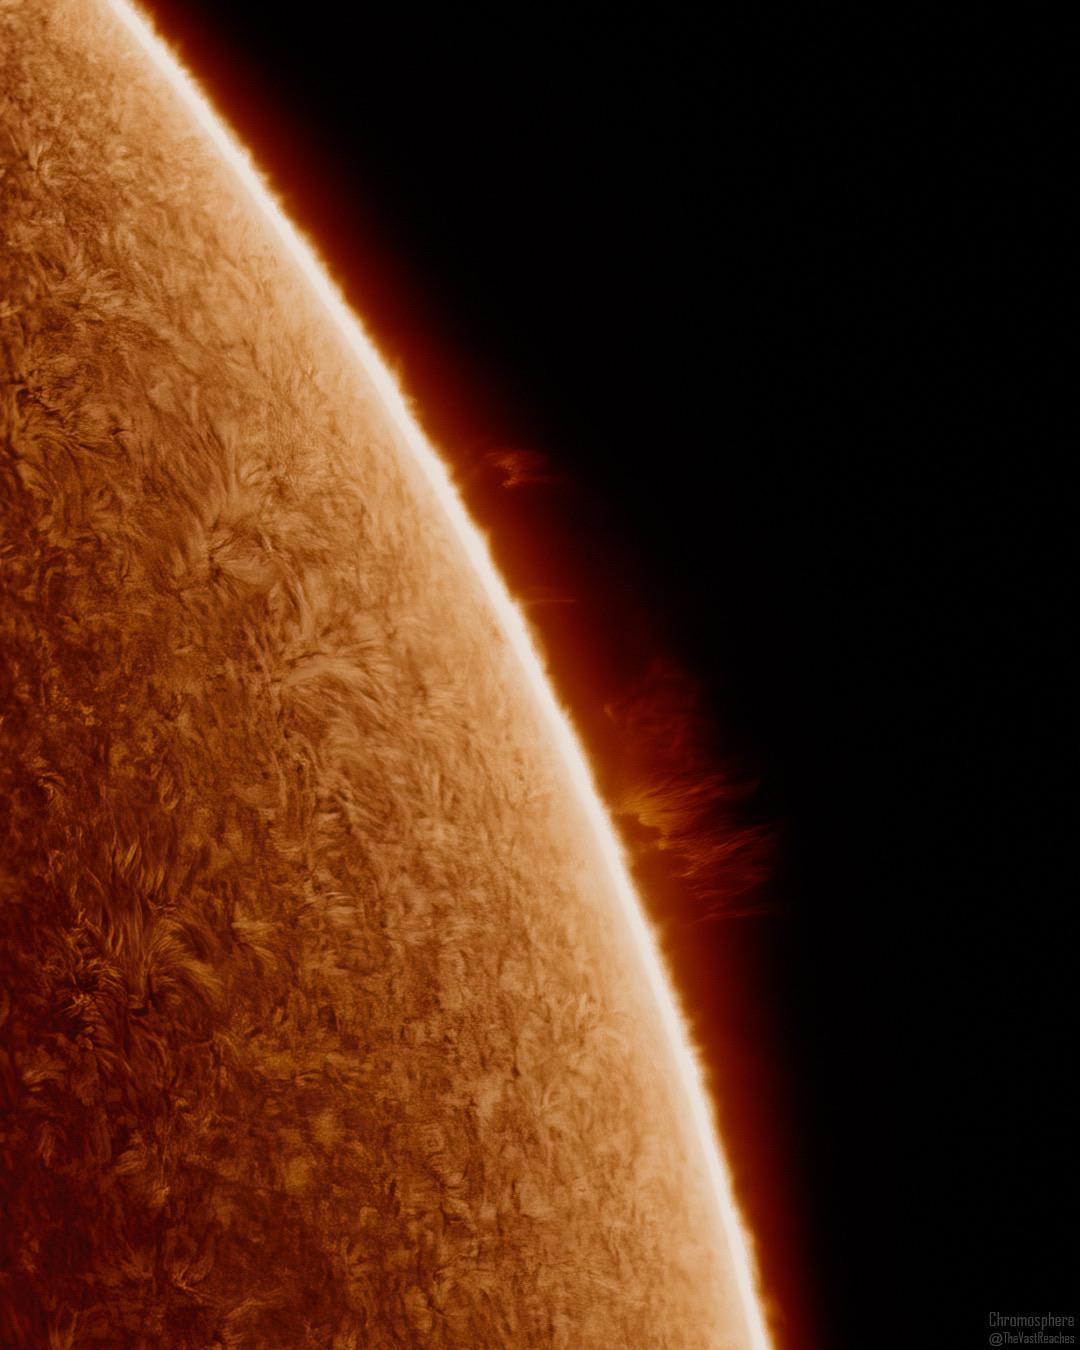 I captured this ultra-detailed look into the atmosphere of our star with a backyard solar telescope.